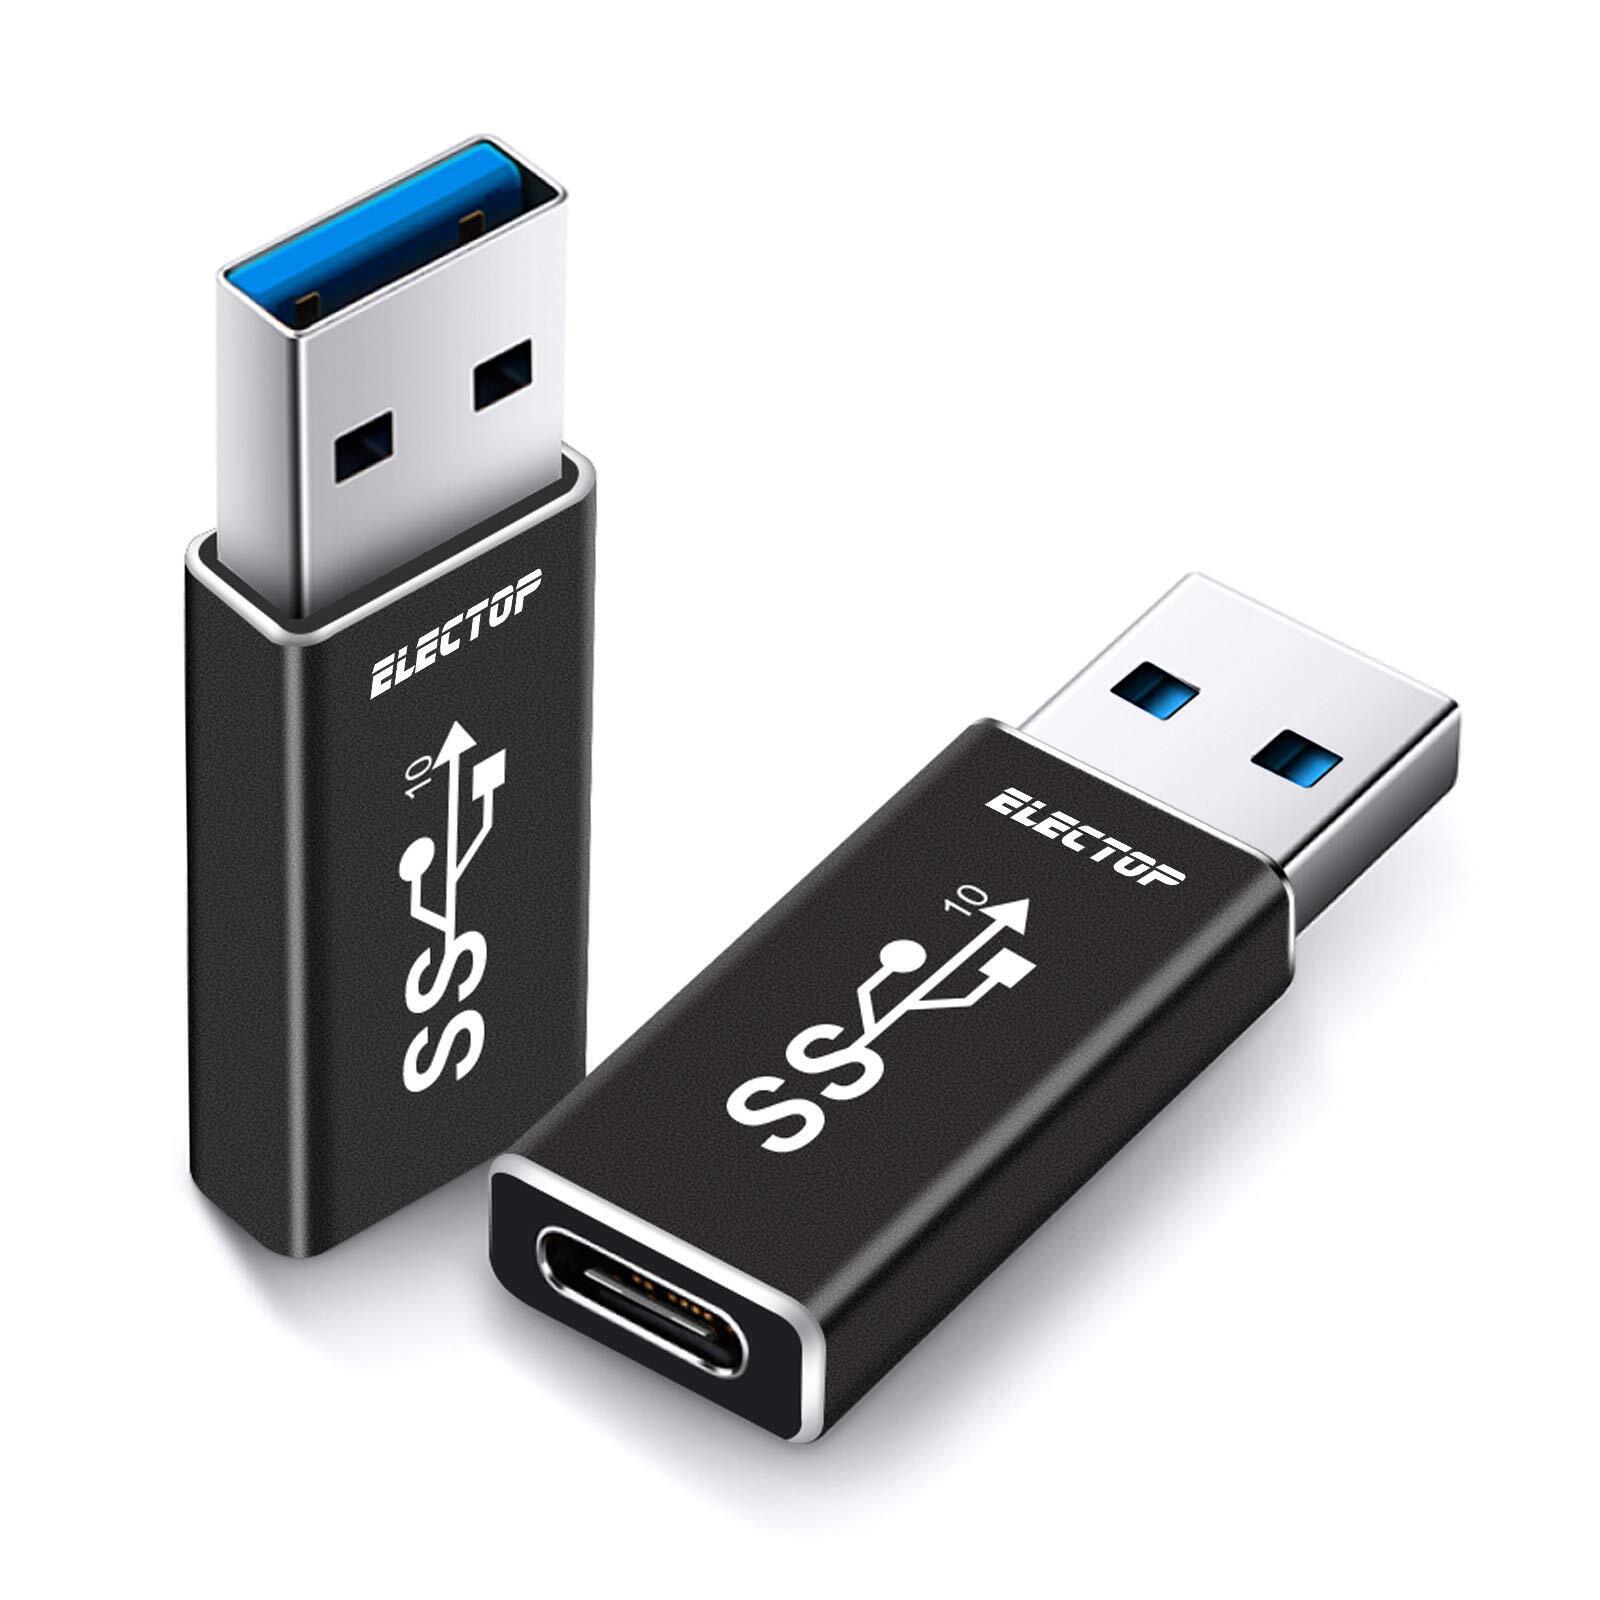 ELECTOP Updated USB 3.1 GEN 2 Male to -C Female Adapter 2 Pack Support Double...